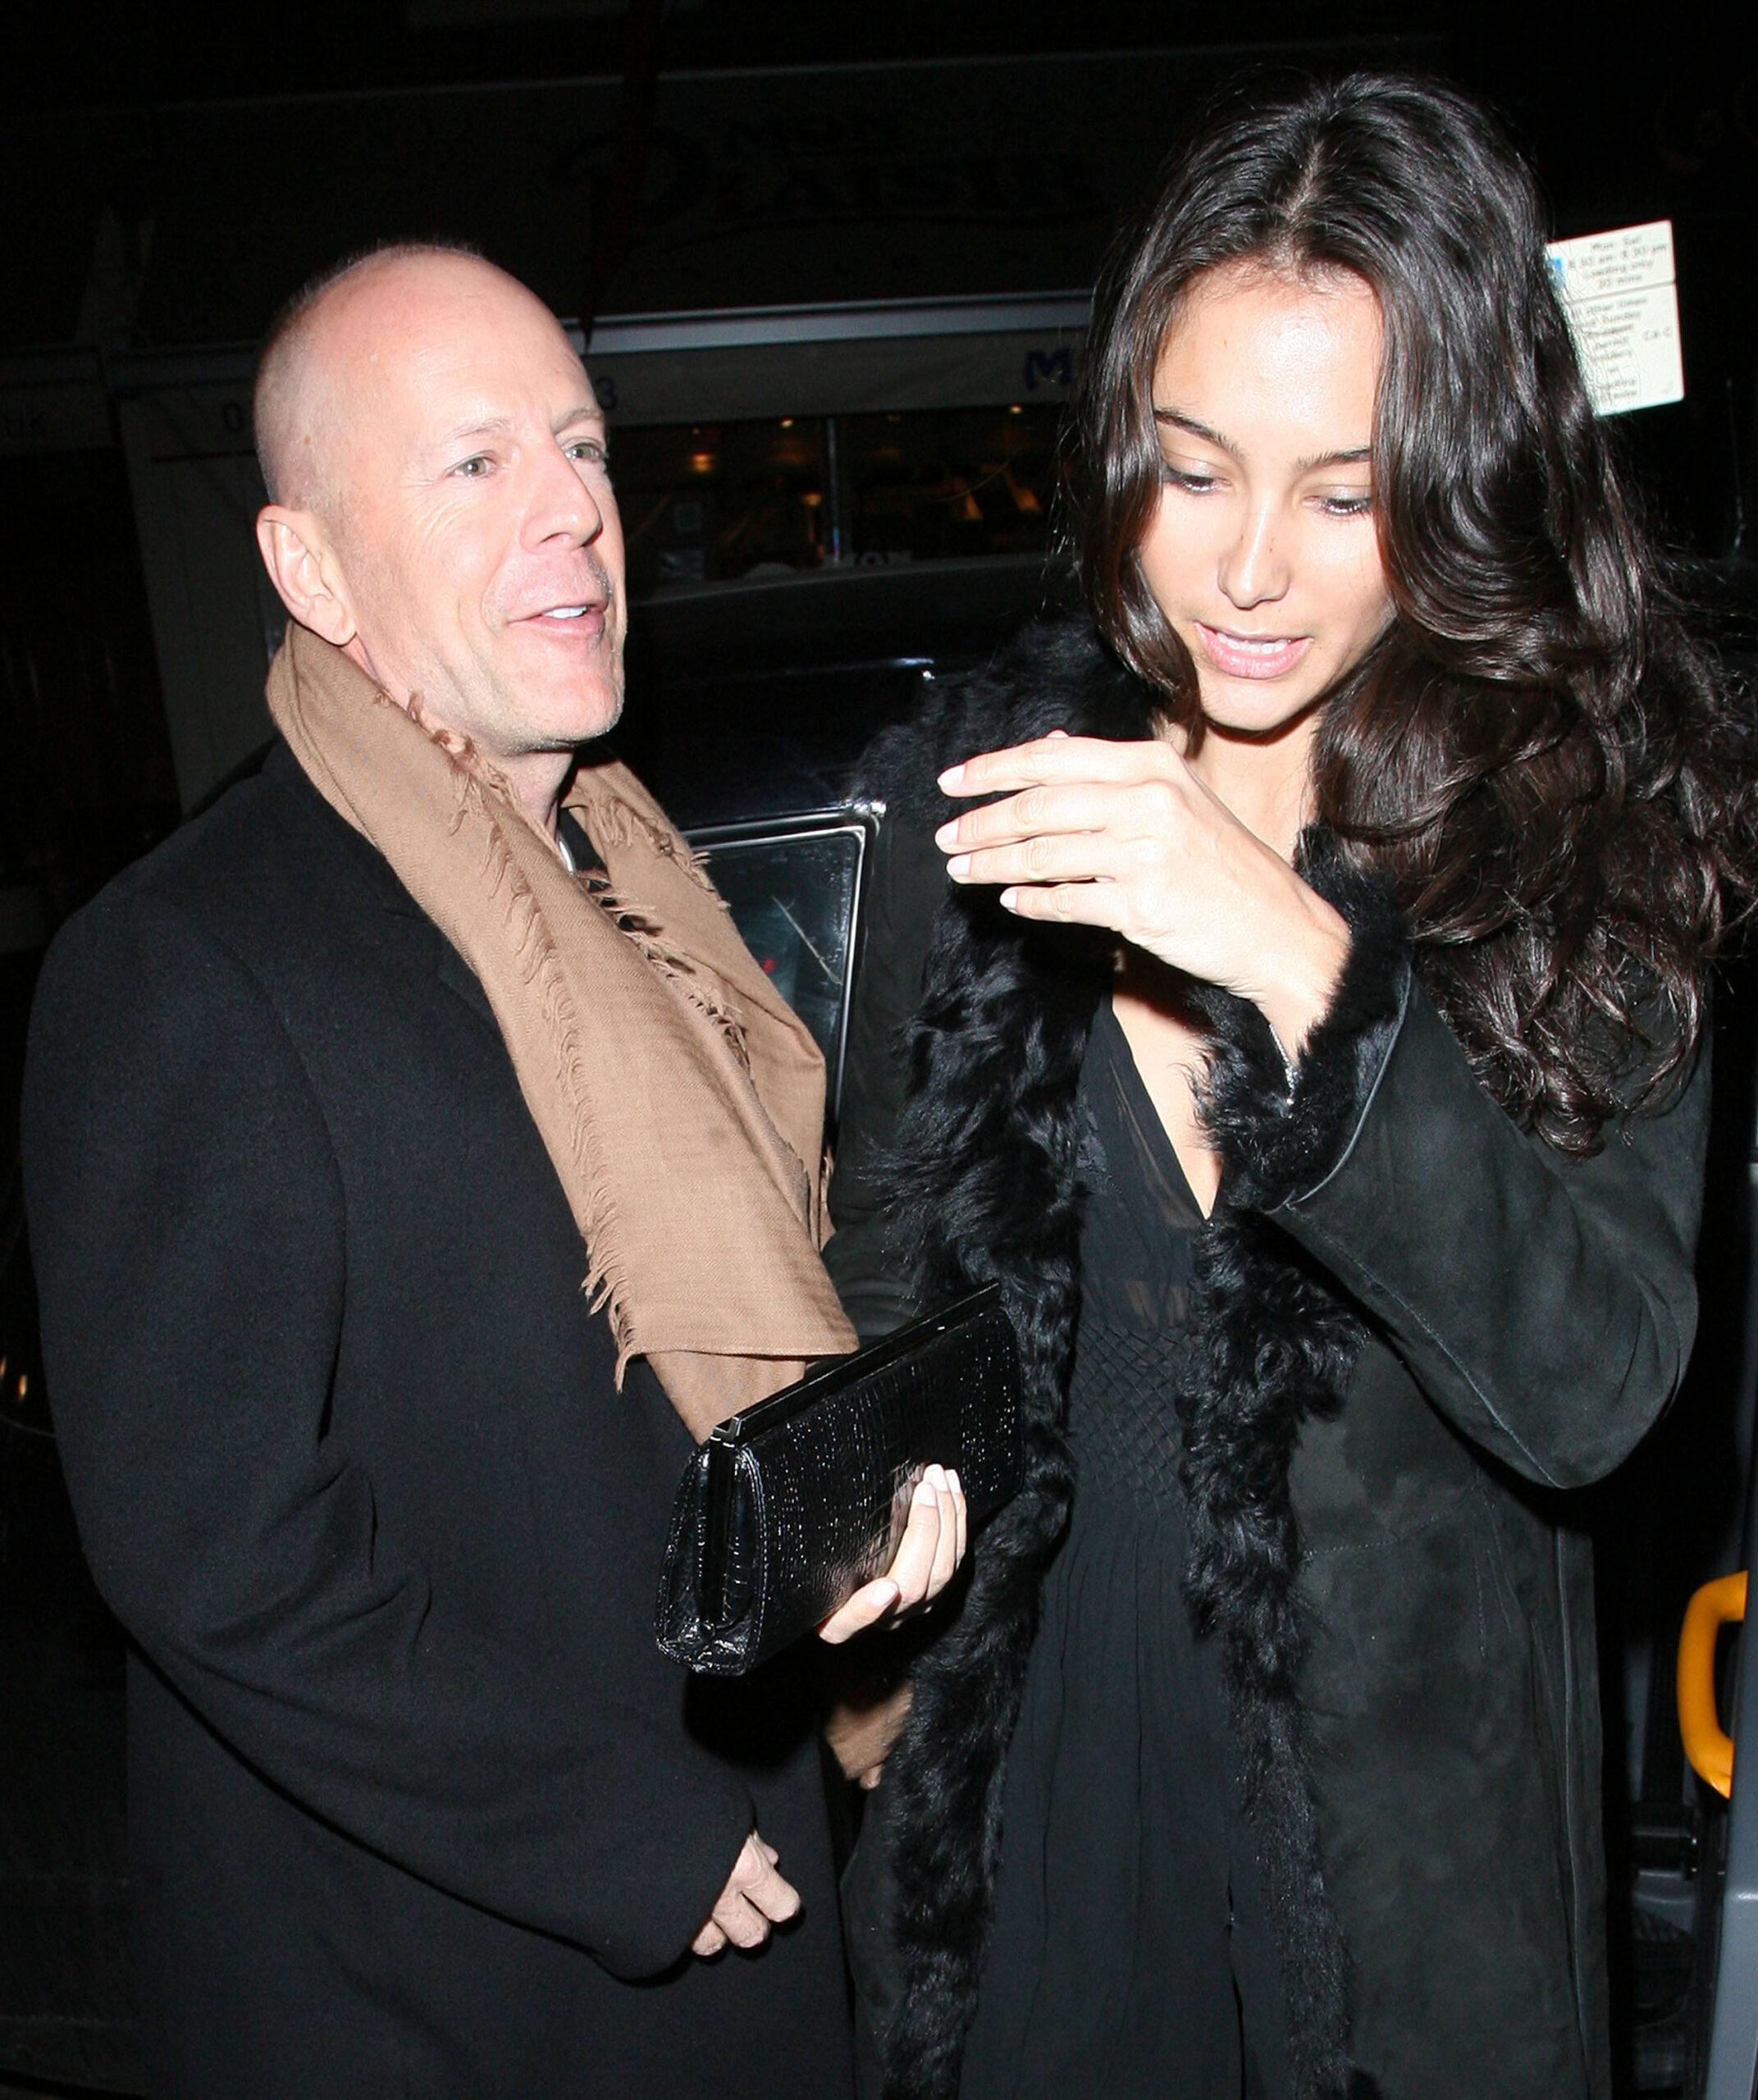 Bruce Willis and his new girlfriend Emma Heming arrive back at the Covent Garden Hotel in a black cab having had had dinner at The Ivy restaurant